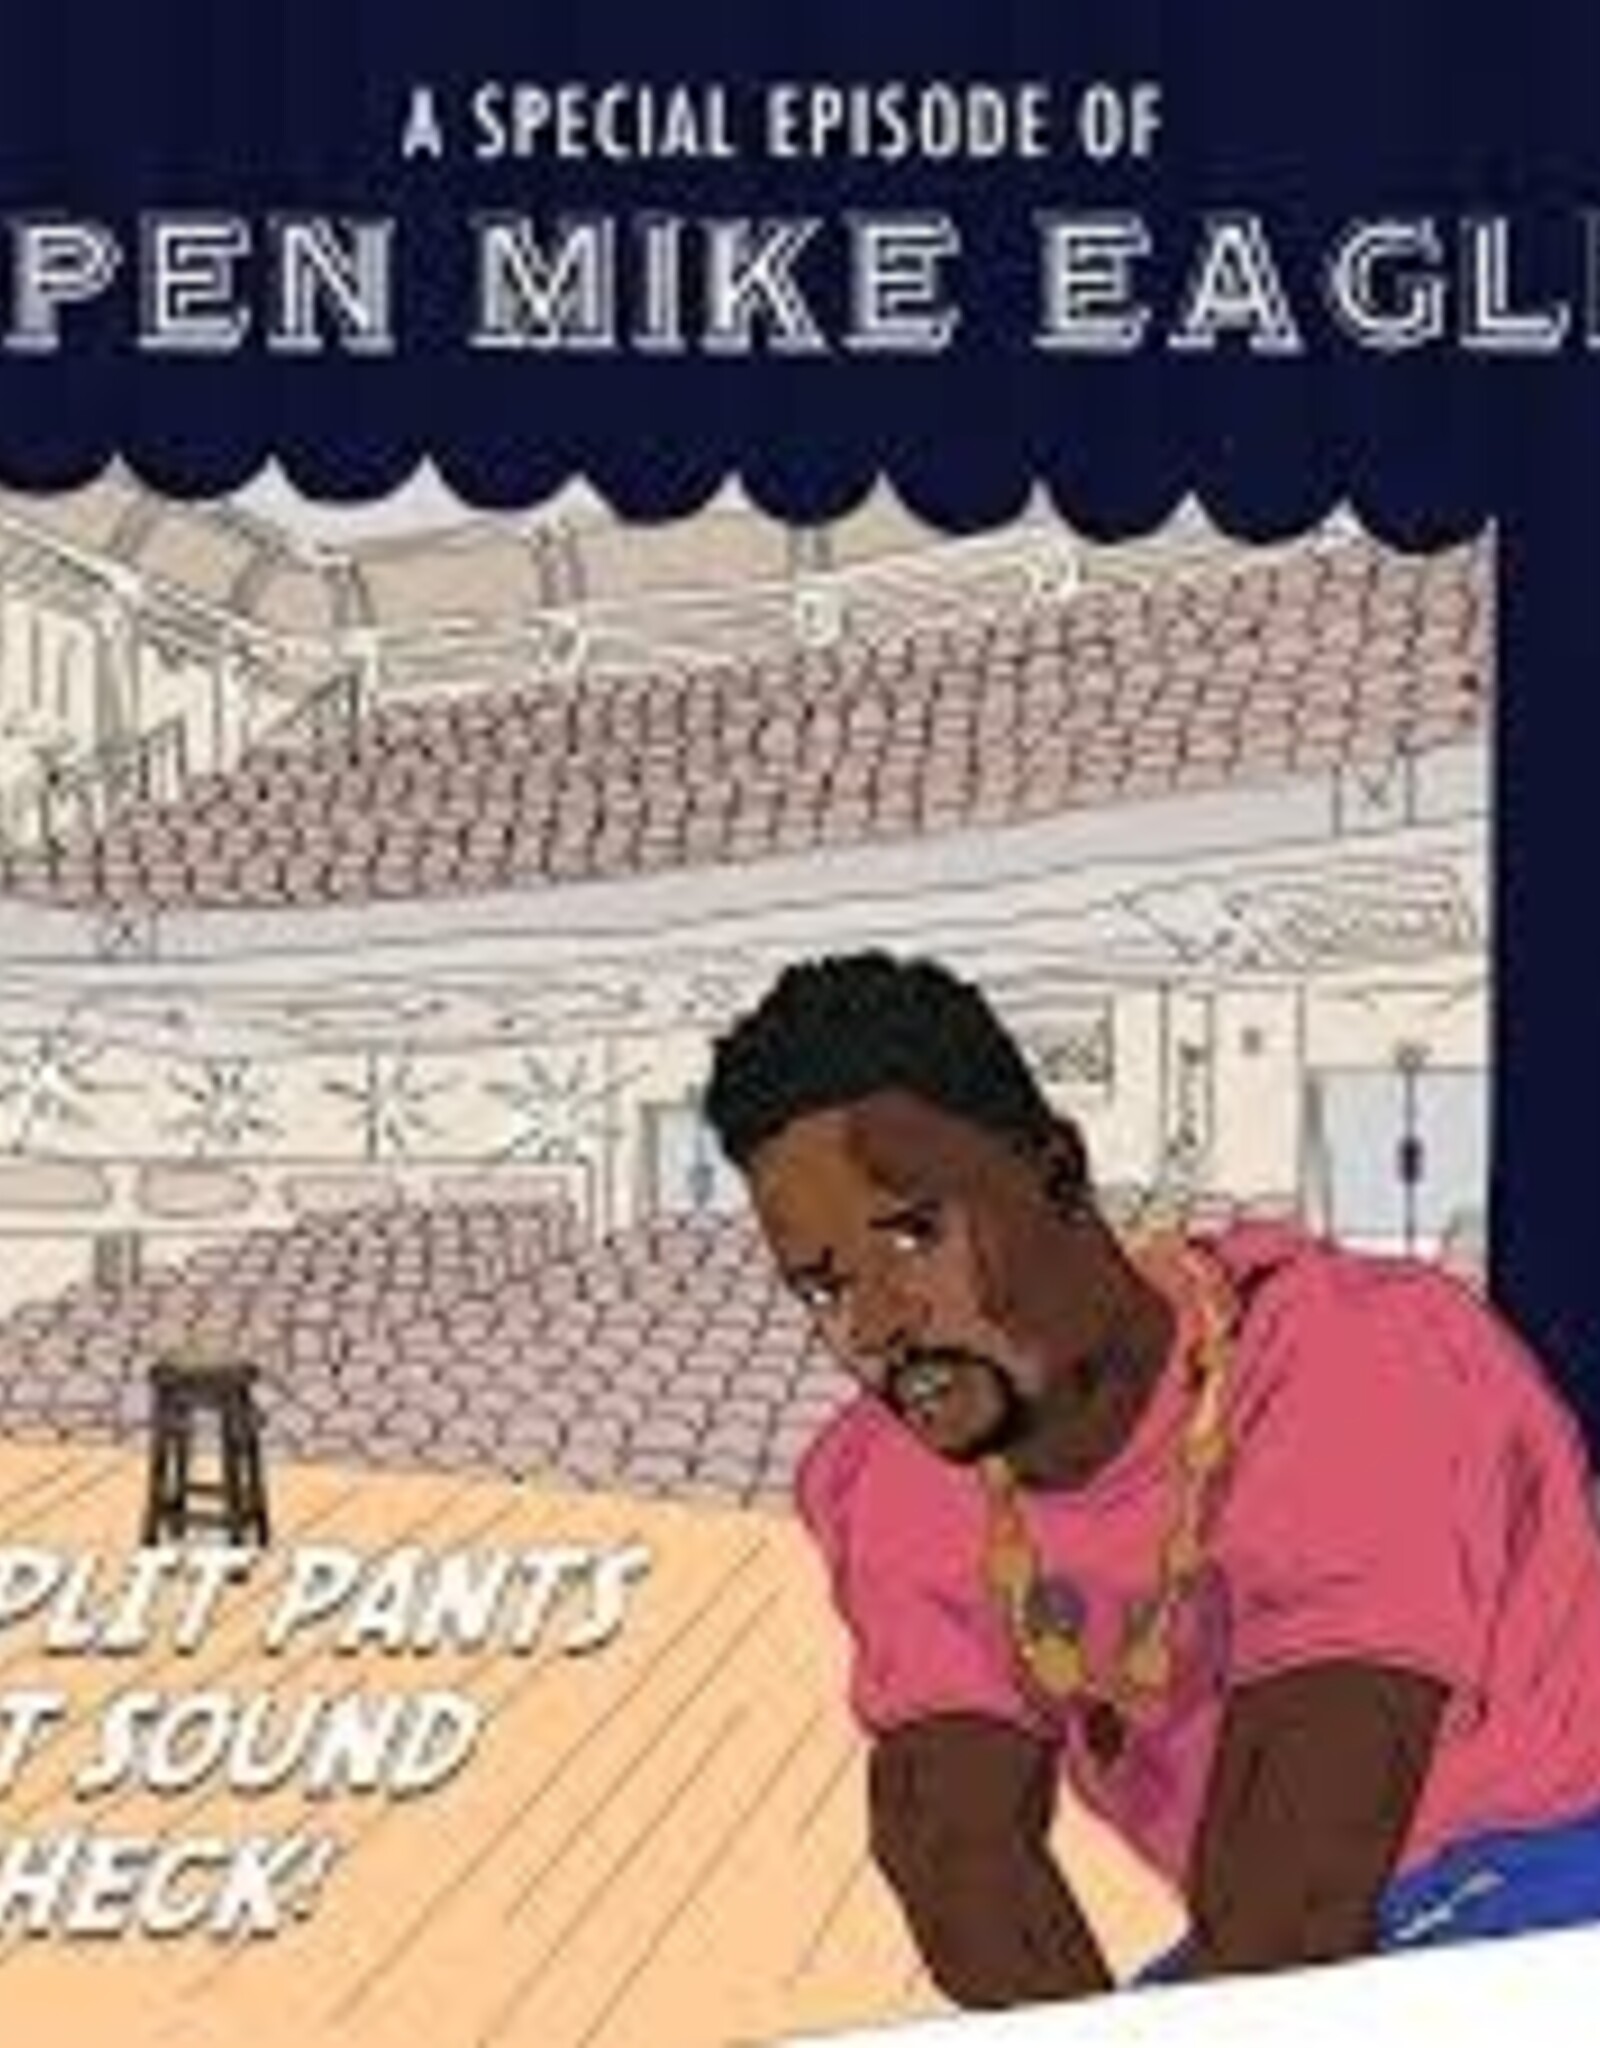 Open Mike Eagle- A Special Episode Of (Purple Butterfly Vinyl)